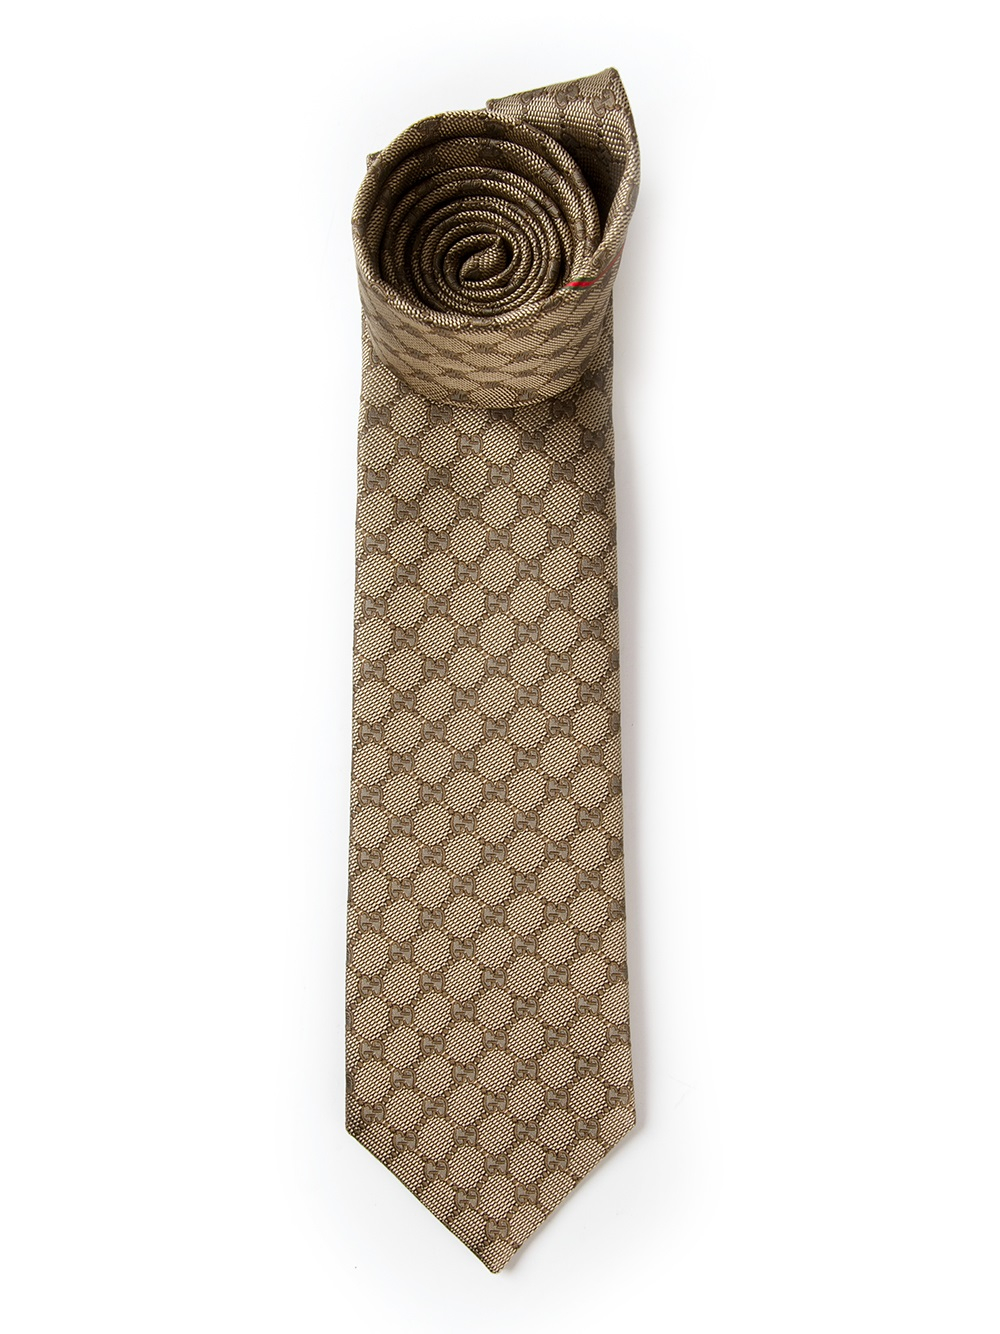 Gucci Monogram Print Tie in Brown for 